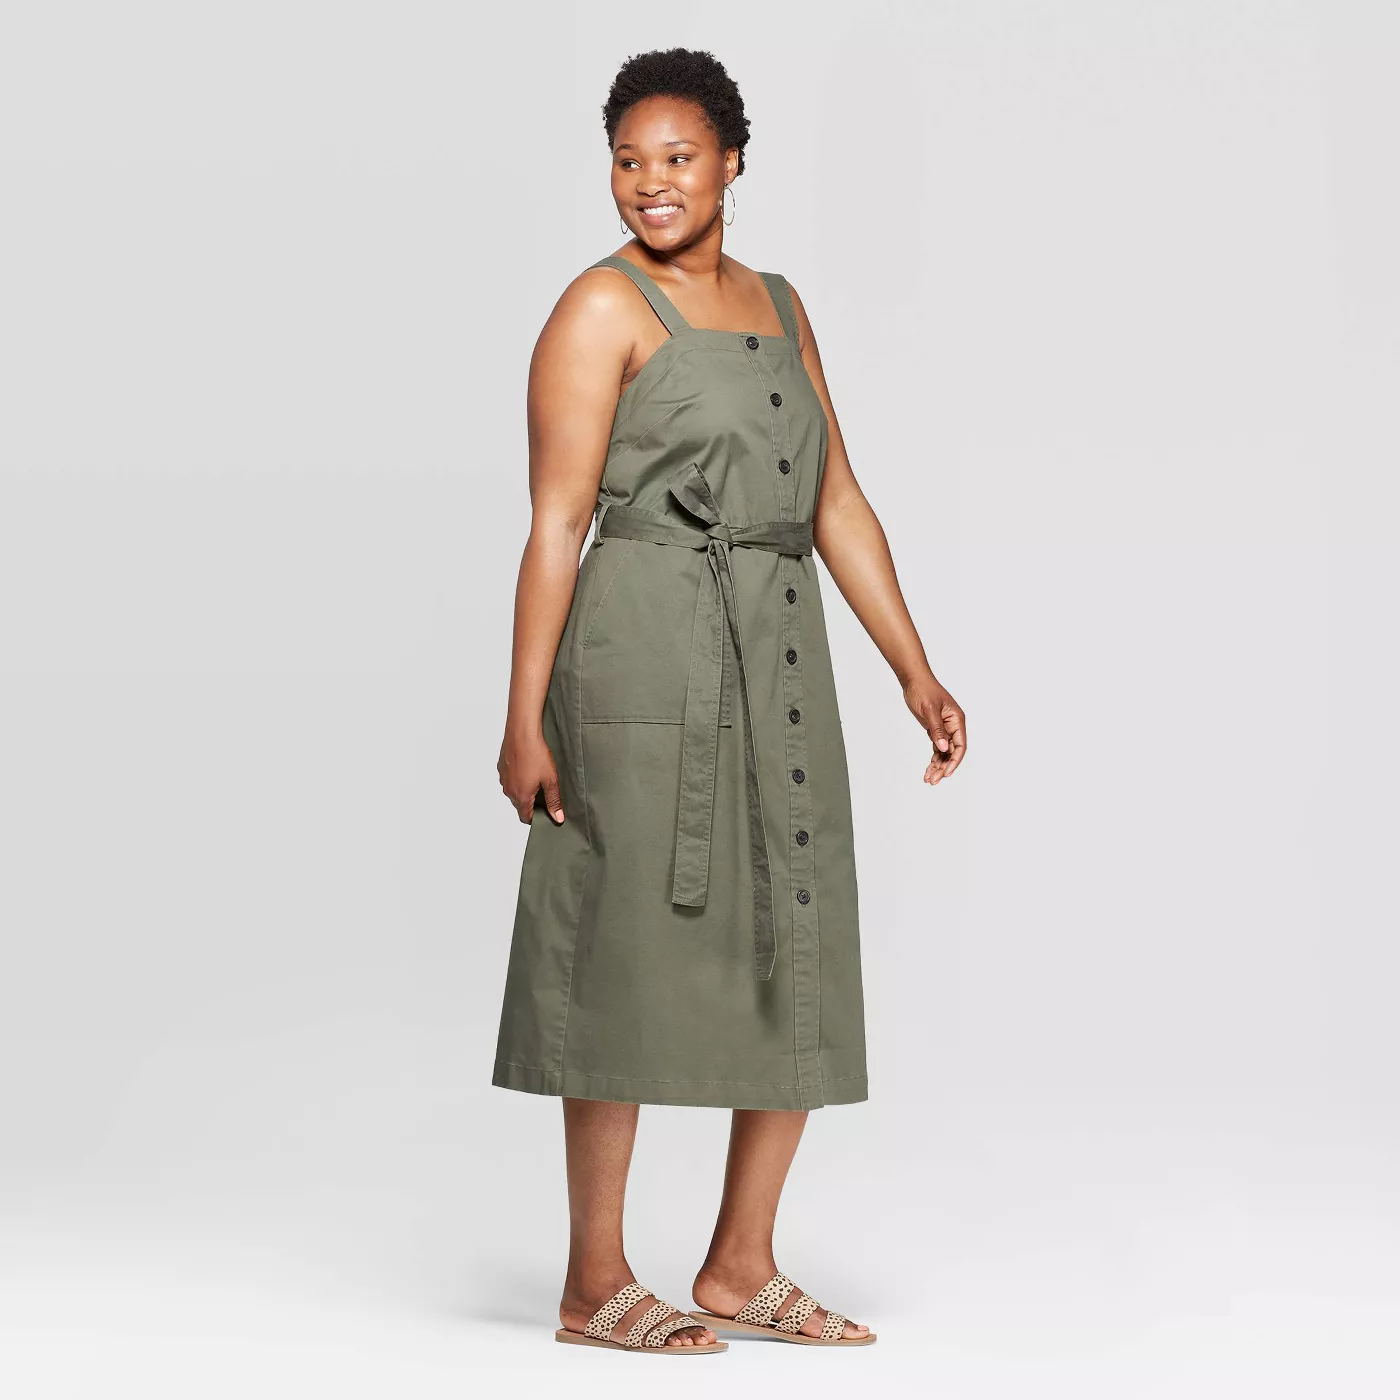 Women's Plus Size Sleeveless Square Neck Button-Front Belted Dress - Universal Threadâ¢ - image 3 of 3